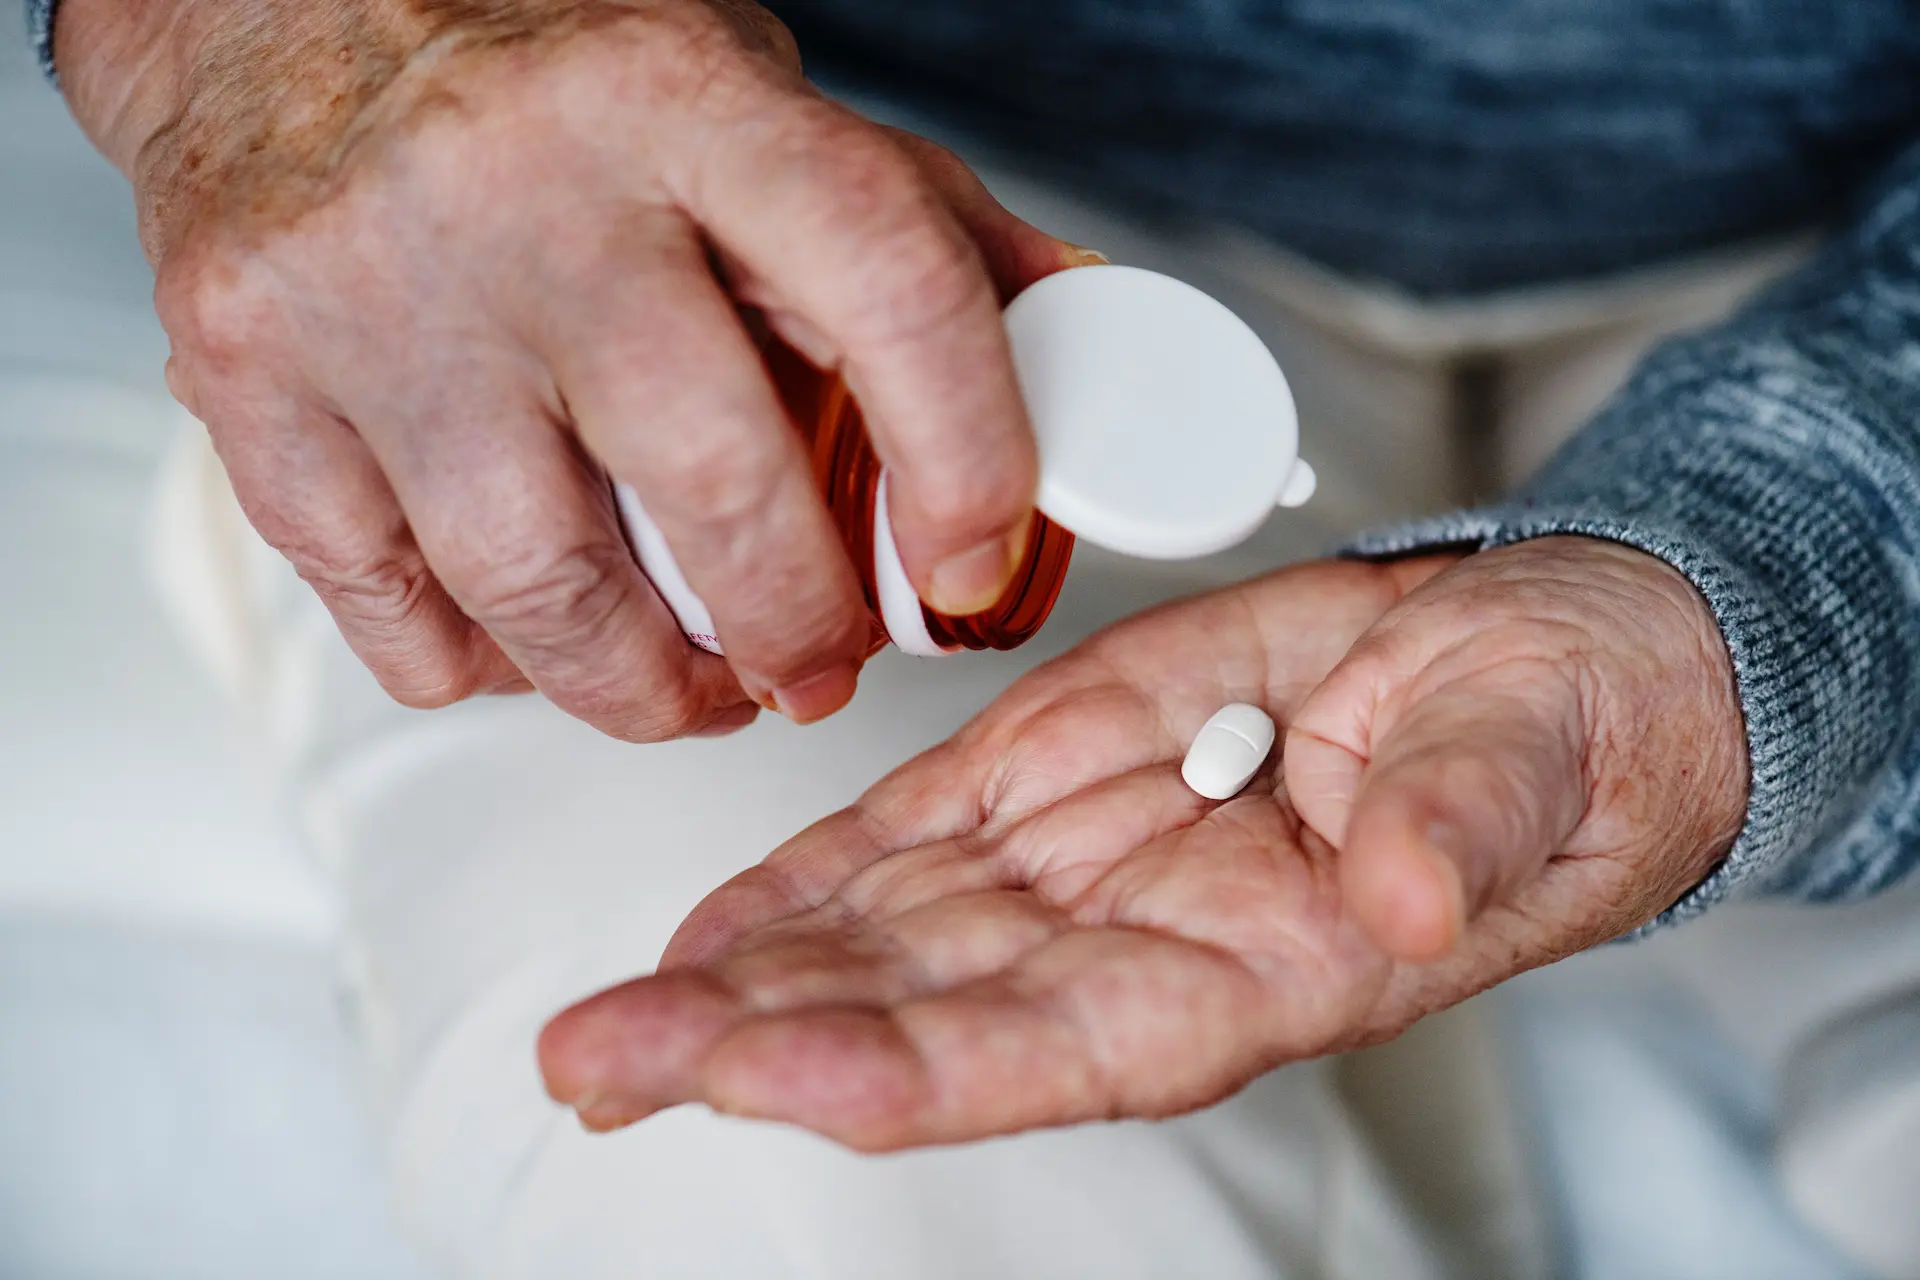 Person pouring medication into their hand from a pill bottle